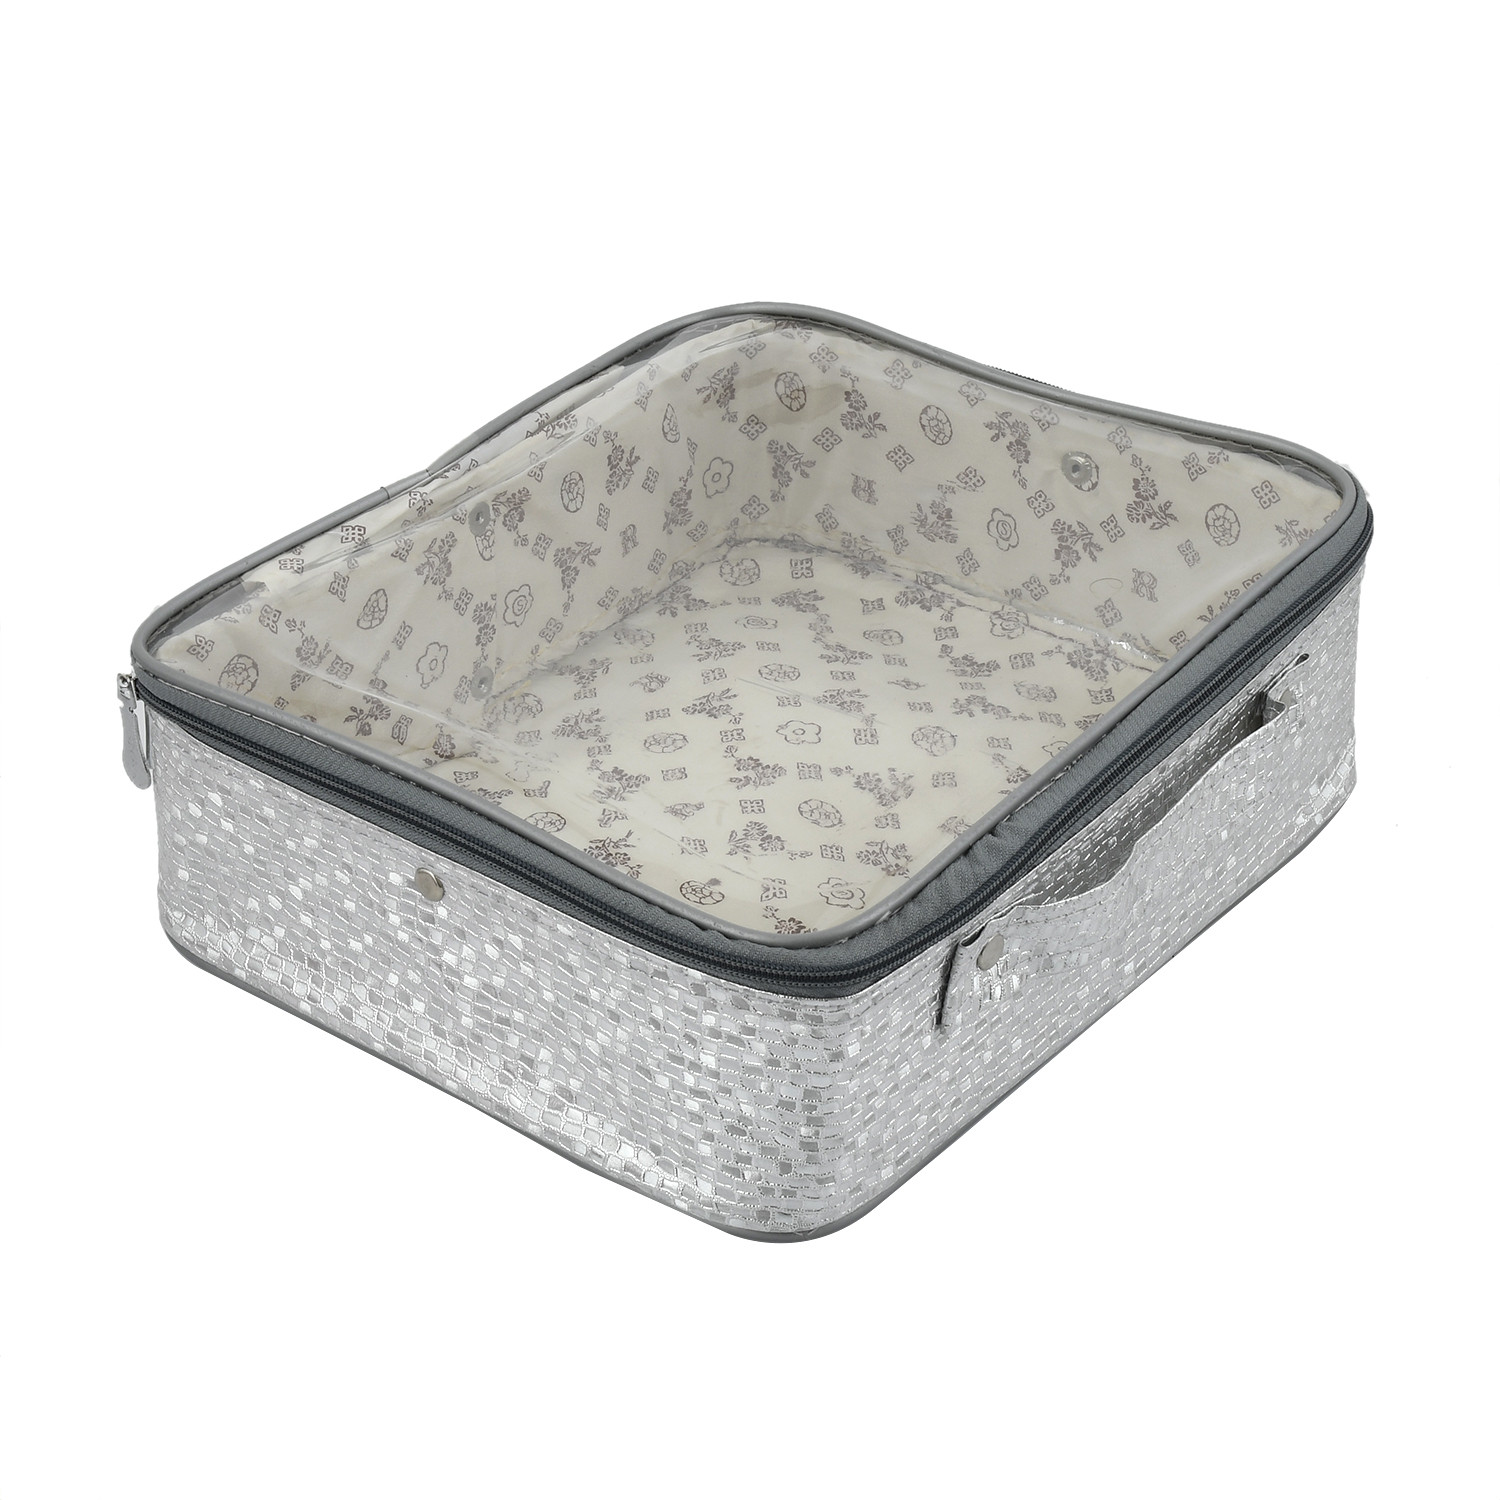 Kuber Industries Square Design Rexine 3 Pieces Make Up Jewellery Vanity Travelling Cosmetic Multipurpose Box (Silver), Collection -CTKTC38179